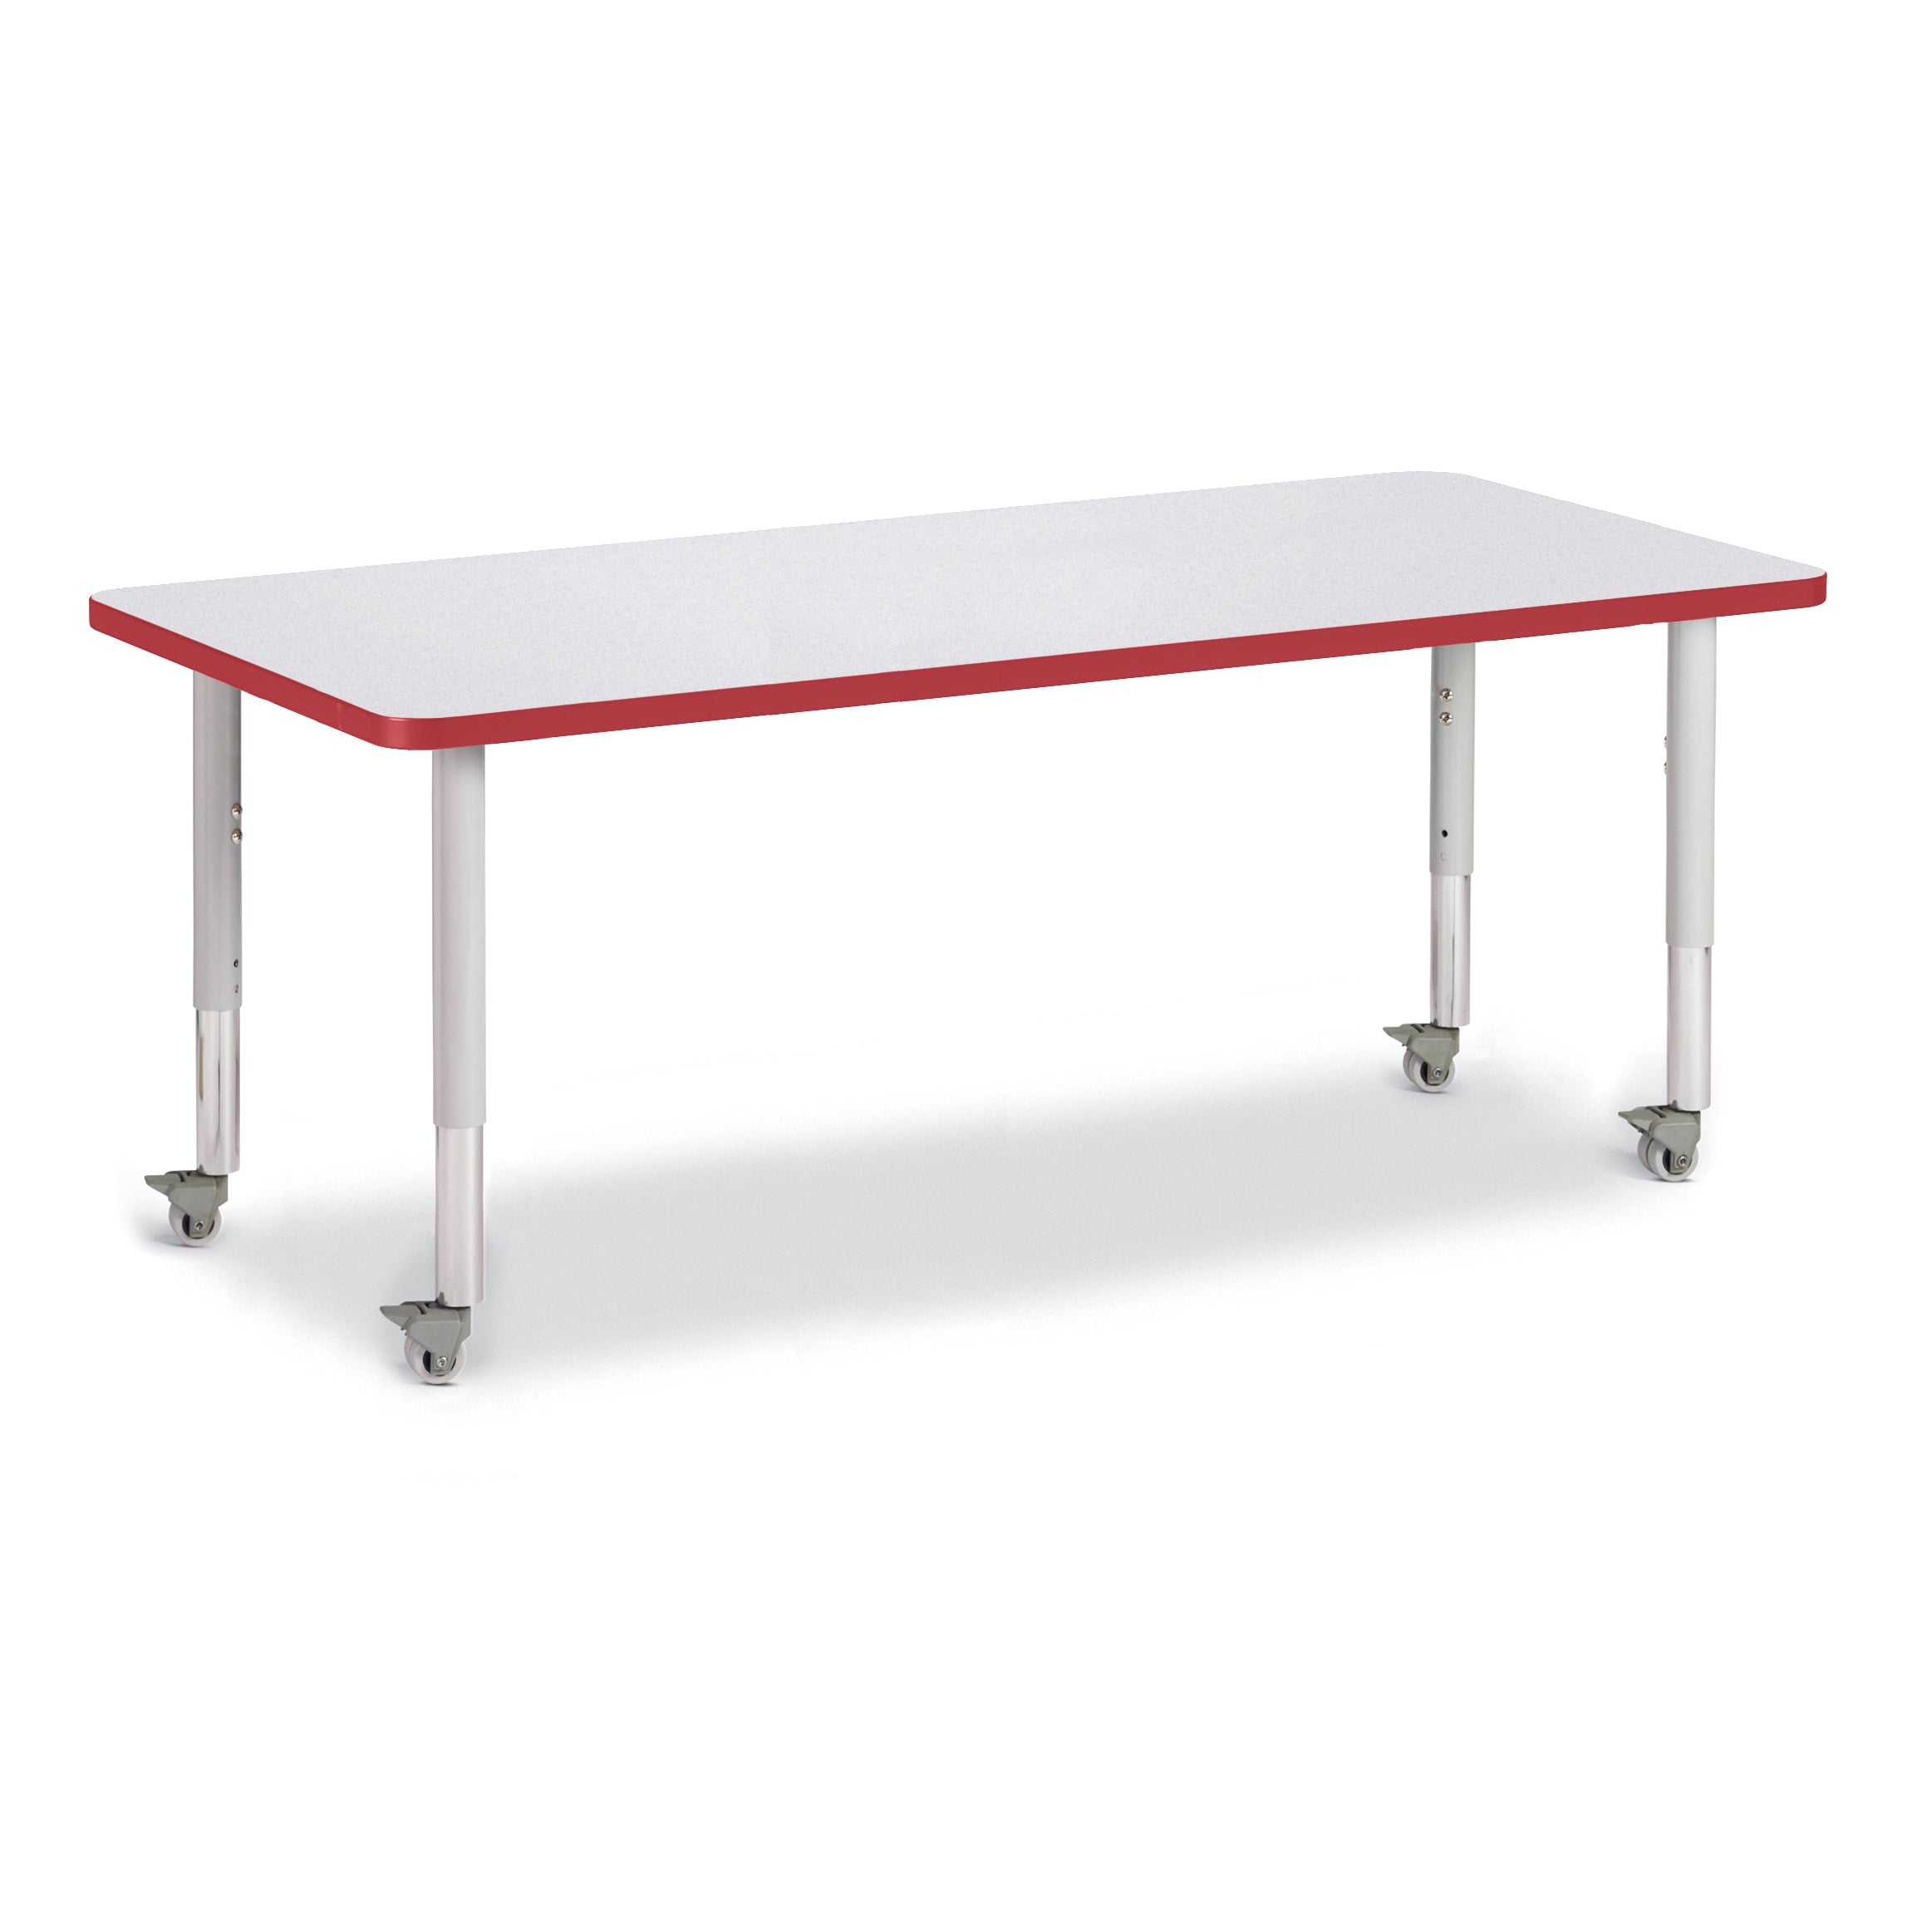 6413JCM008, Berries Rectangle Activity Table - 30" X 72", Mobile - Freckled Gray/Red/Gray